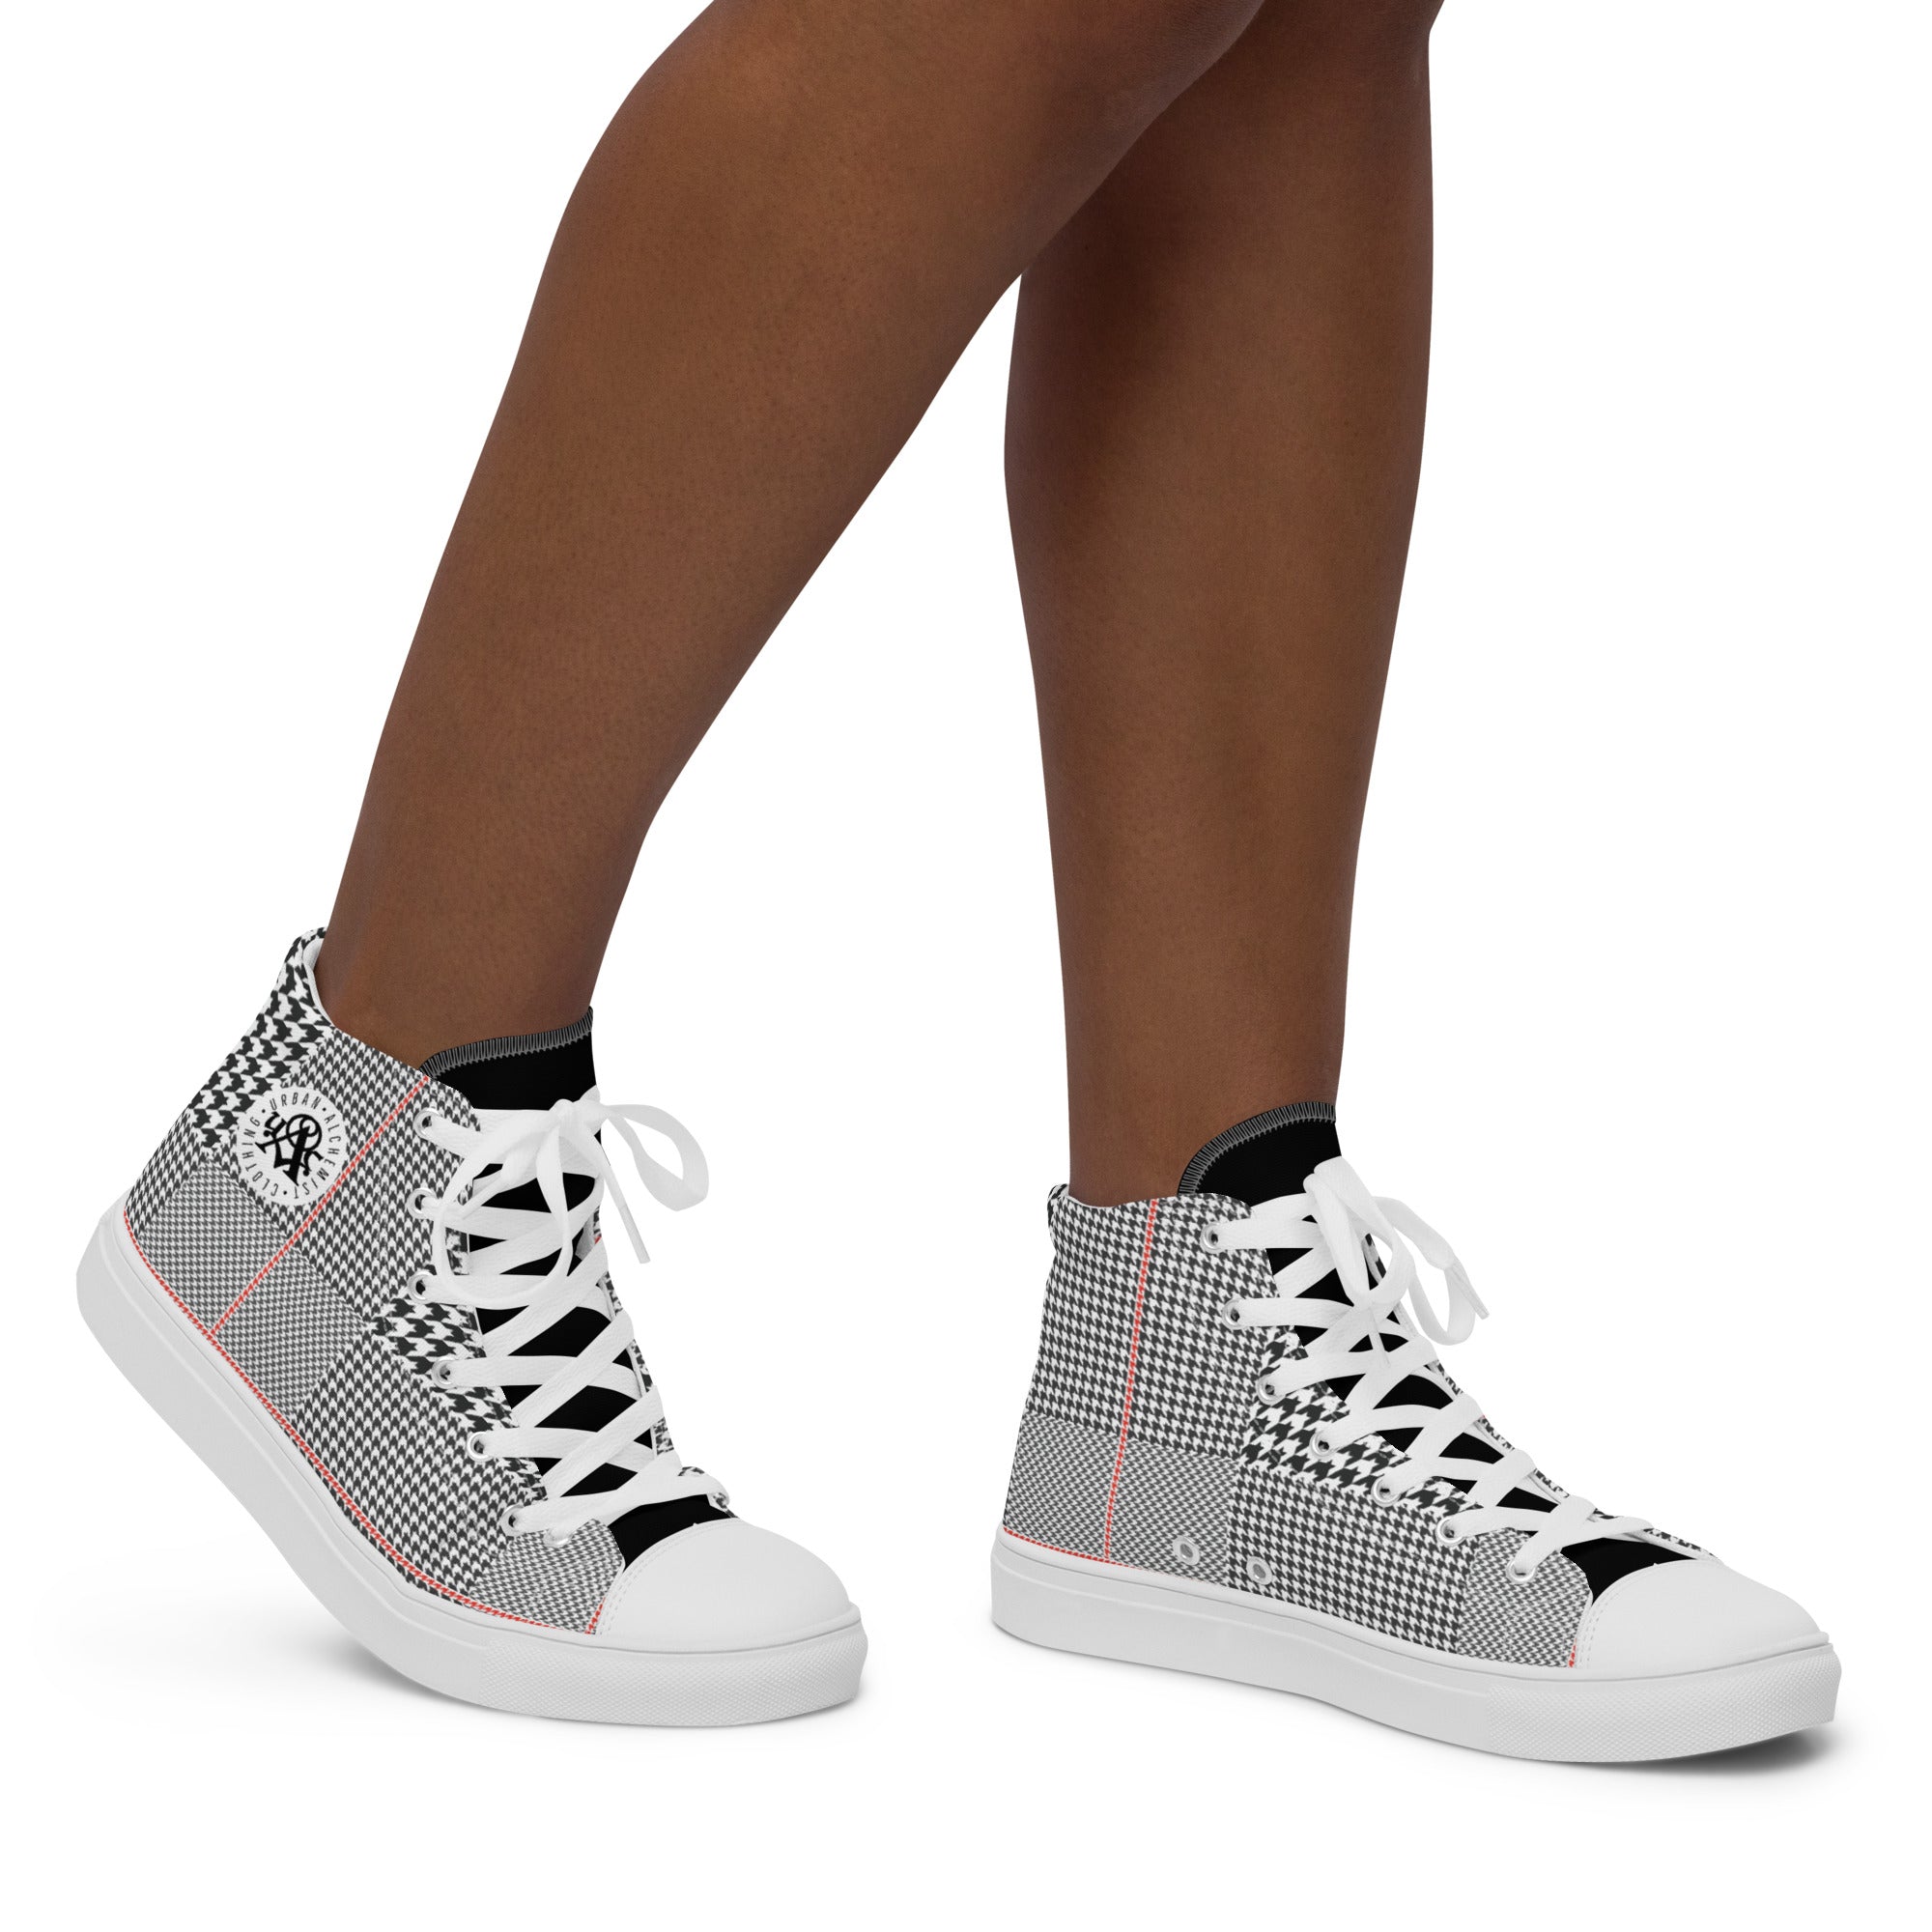 Houndstooth - Women’s high top canvas shoes